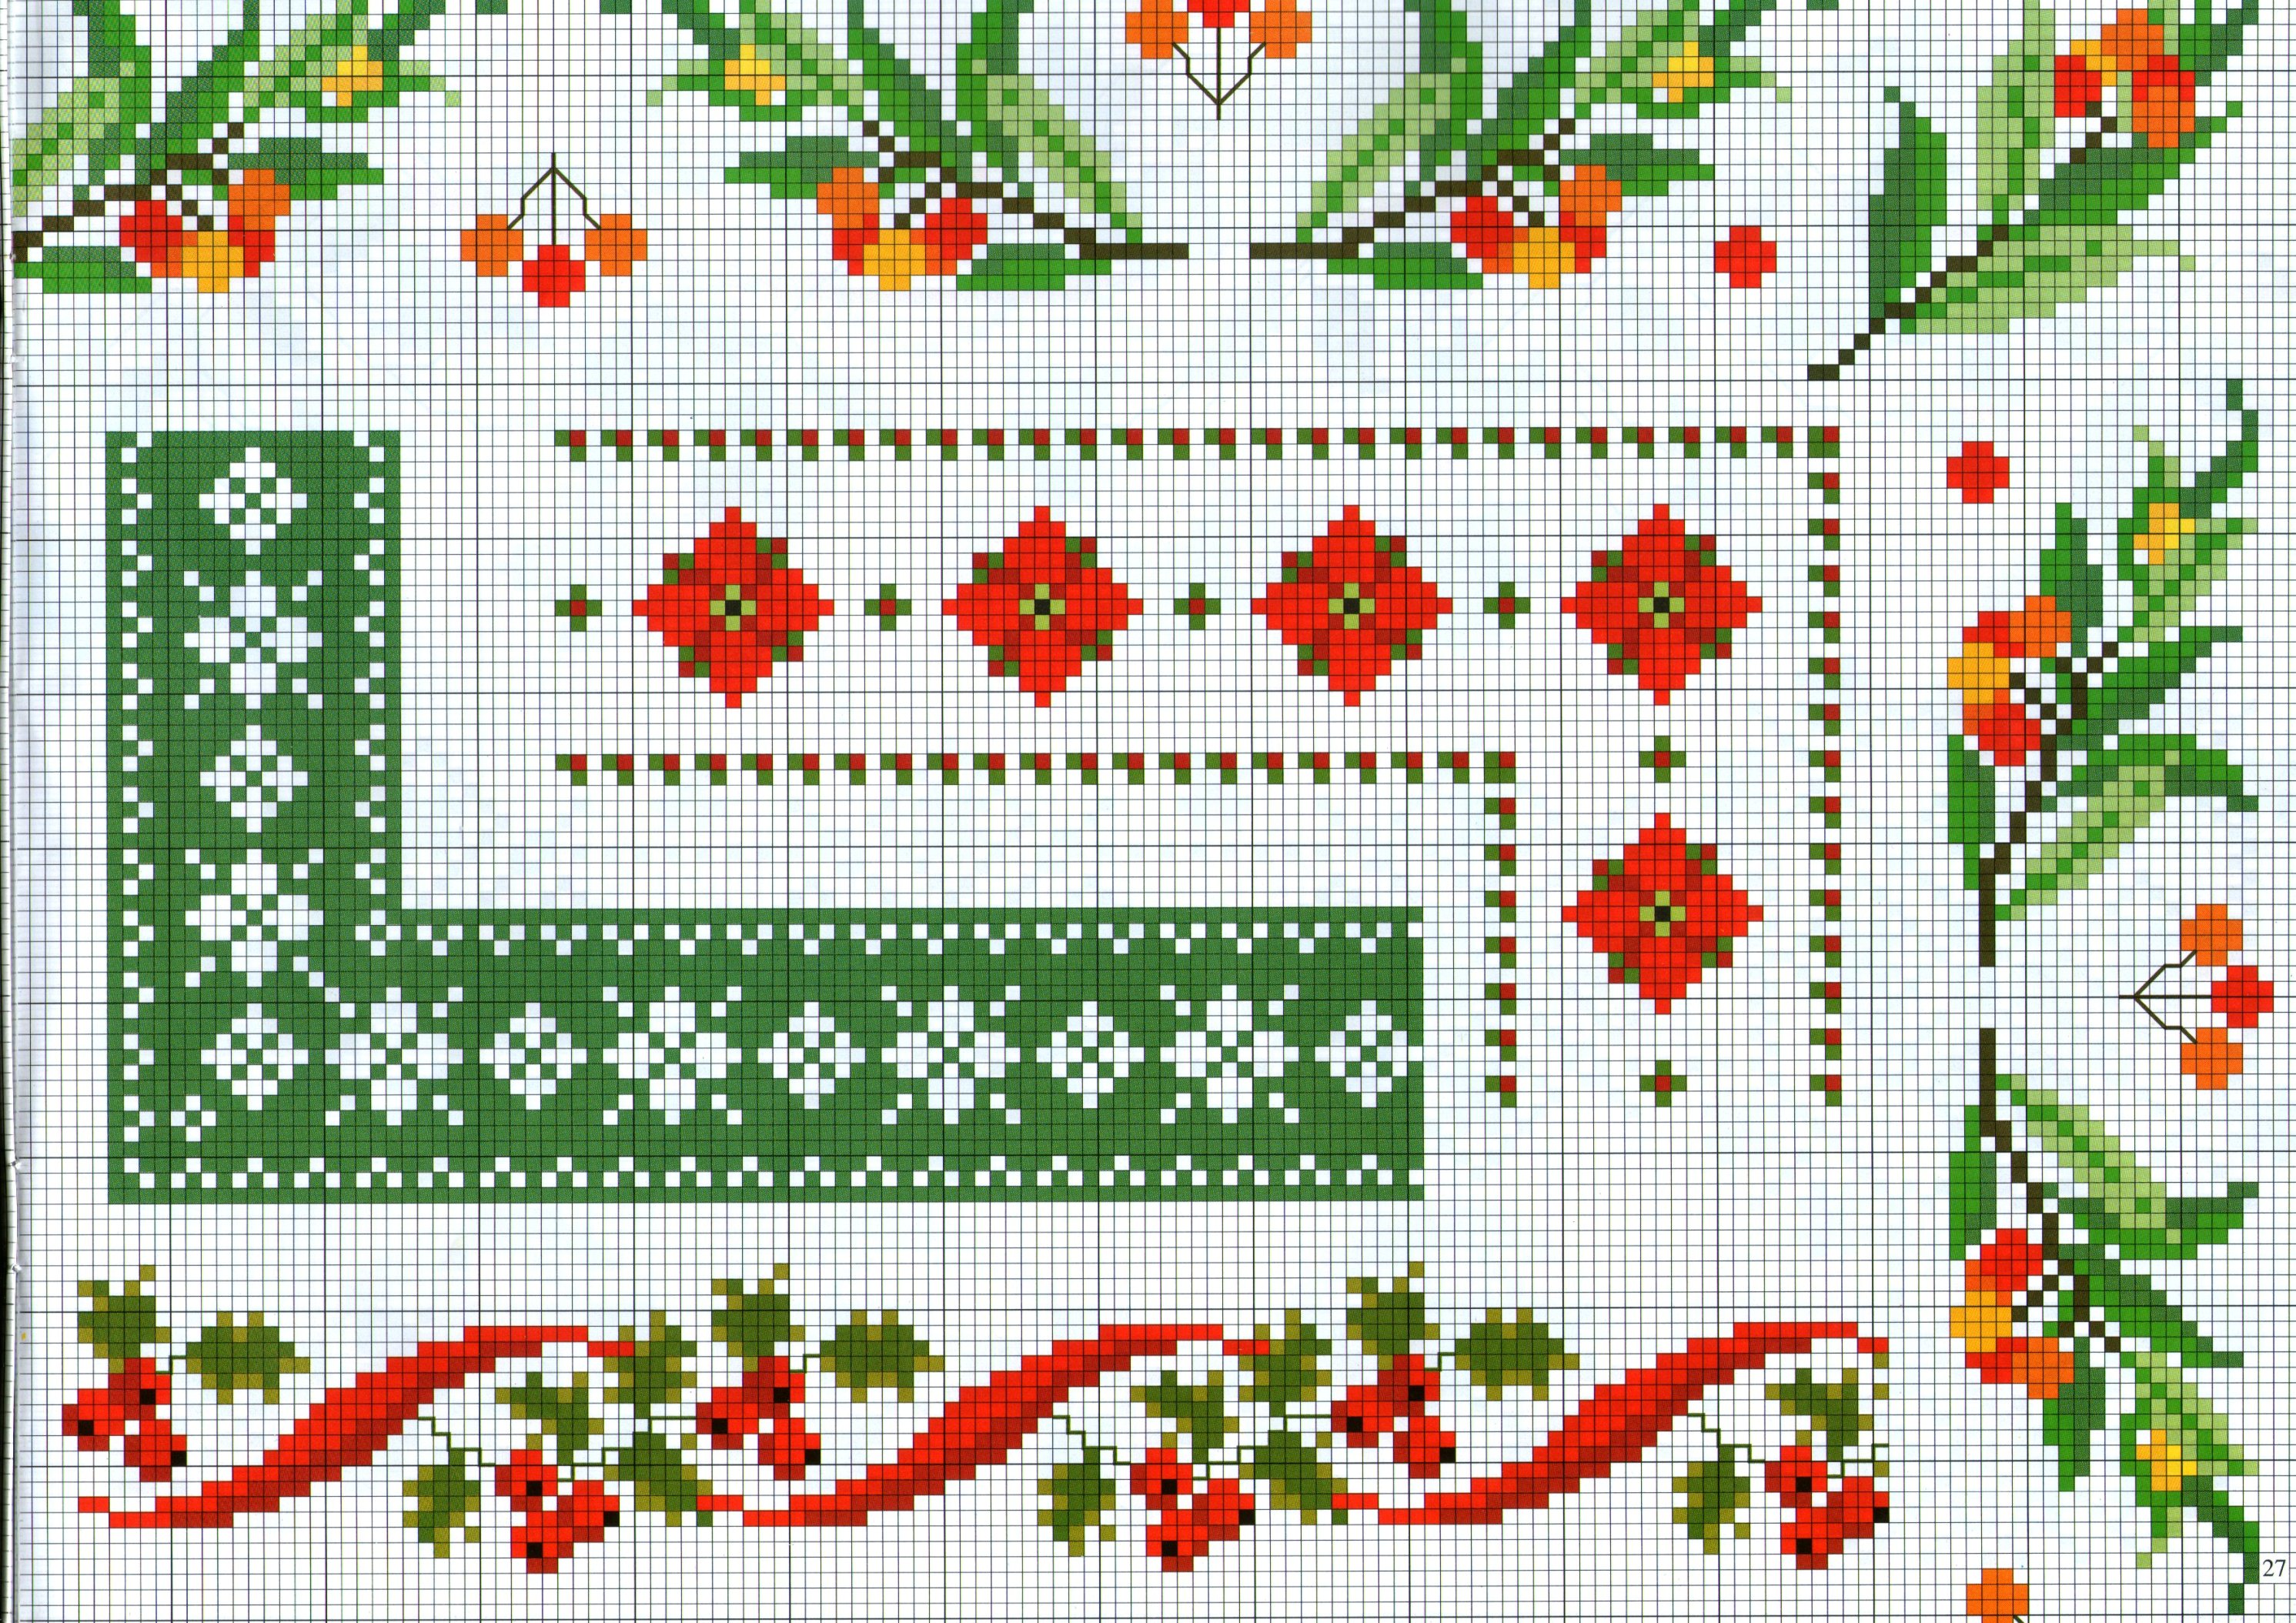 borders cross stitch with wild berries and red flowers